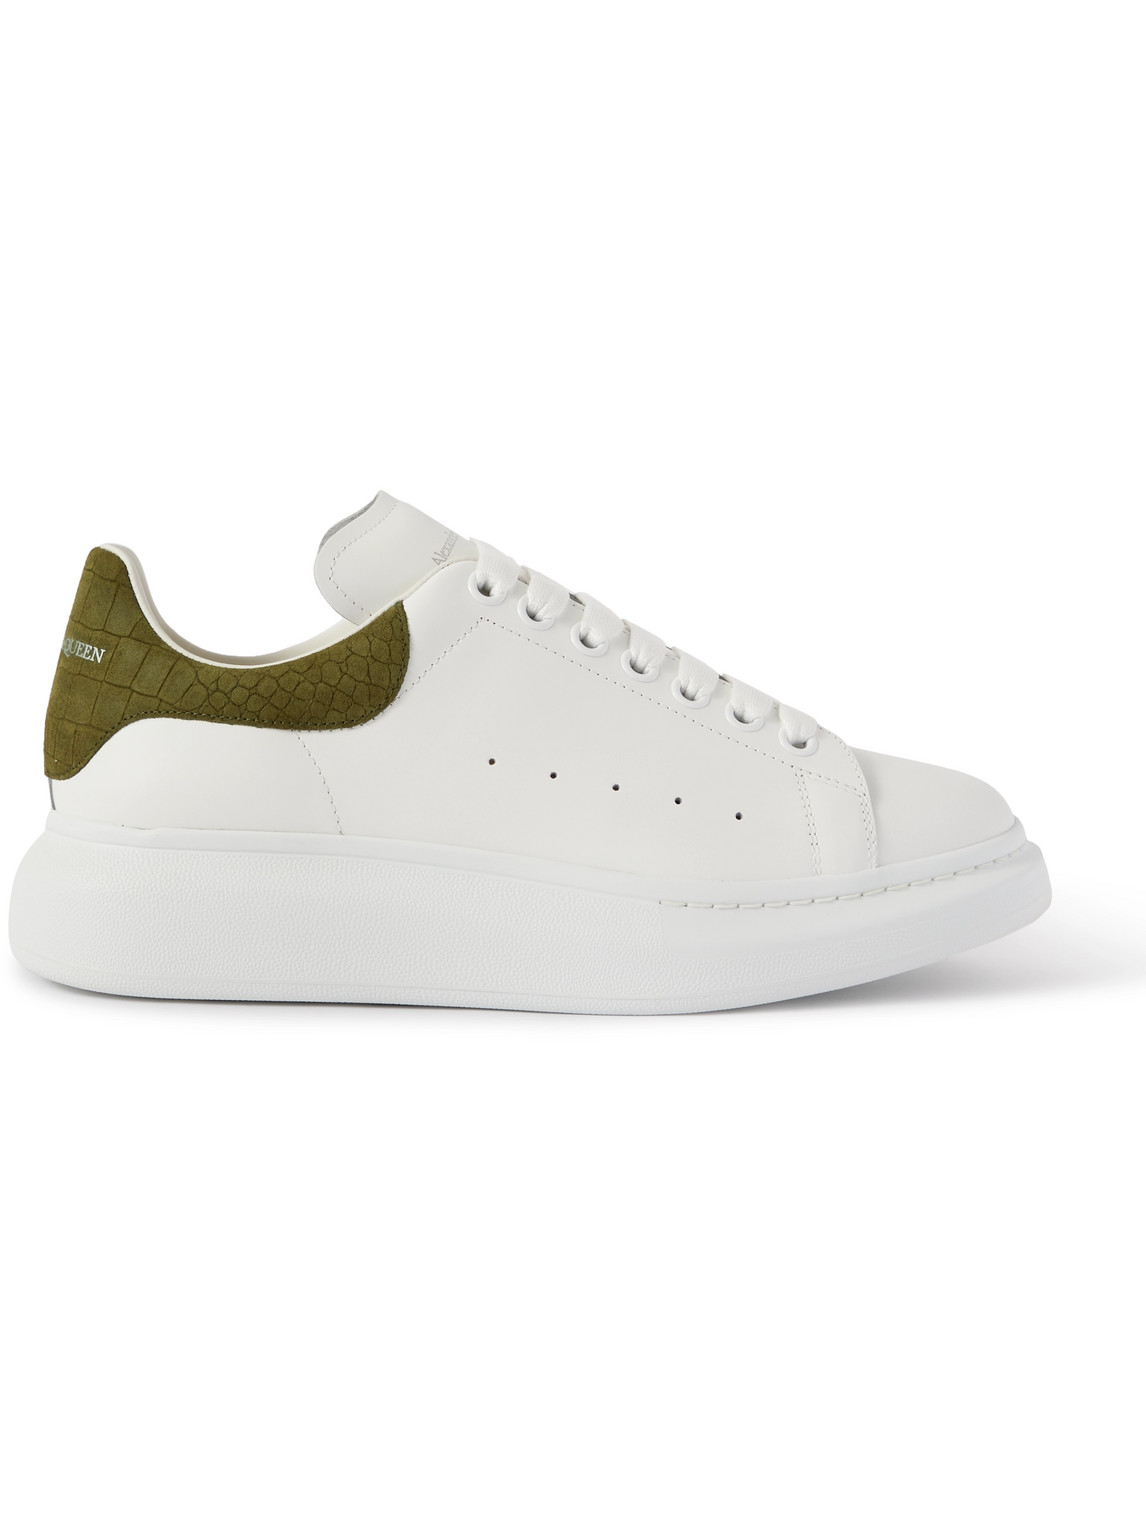 ALEXANDER MCQUEEN EXAGGERATED-SOLE CROC-EFFECT SUEDE-TRIMMED LEATHER SNEAKERS